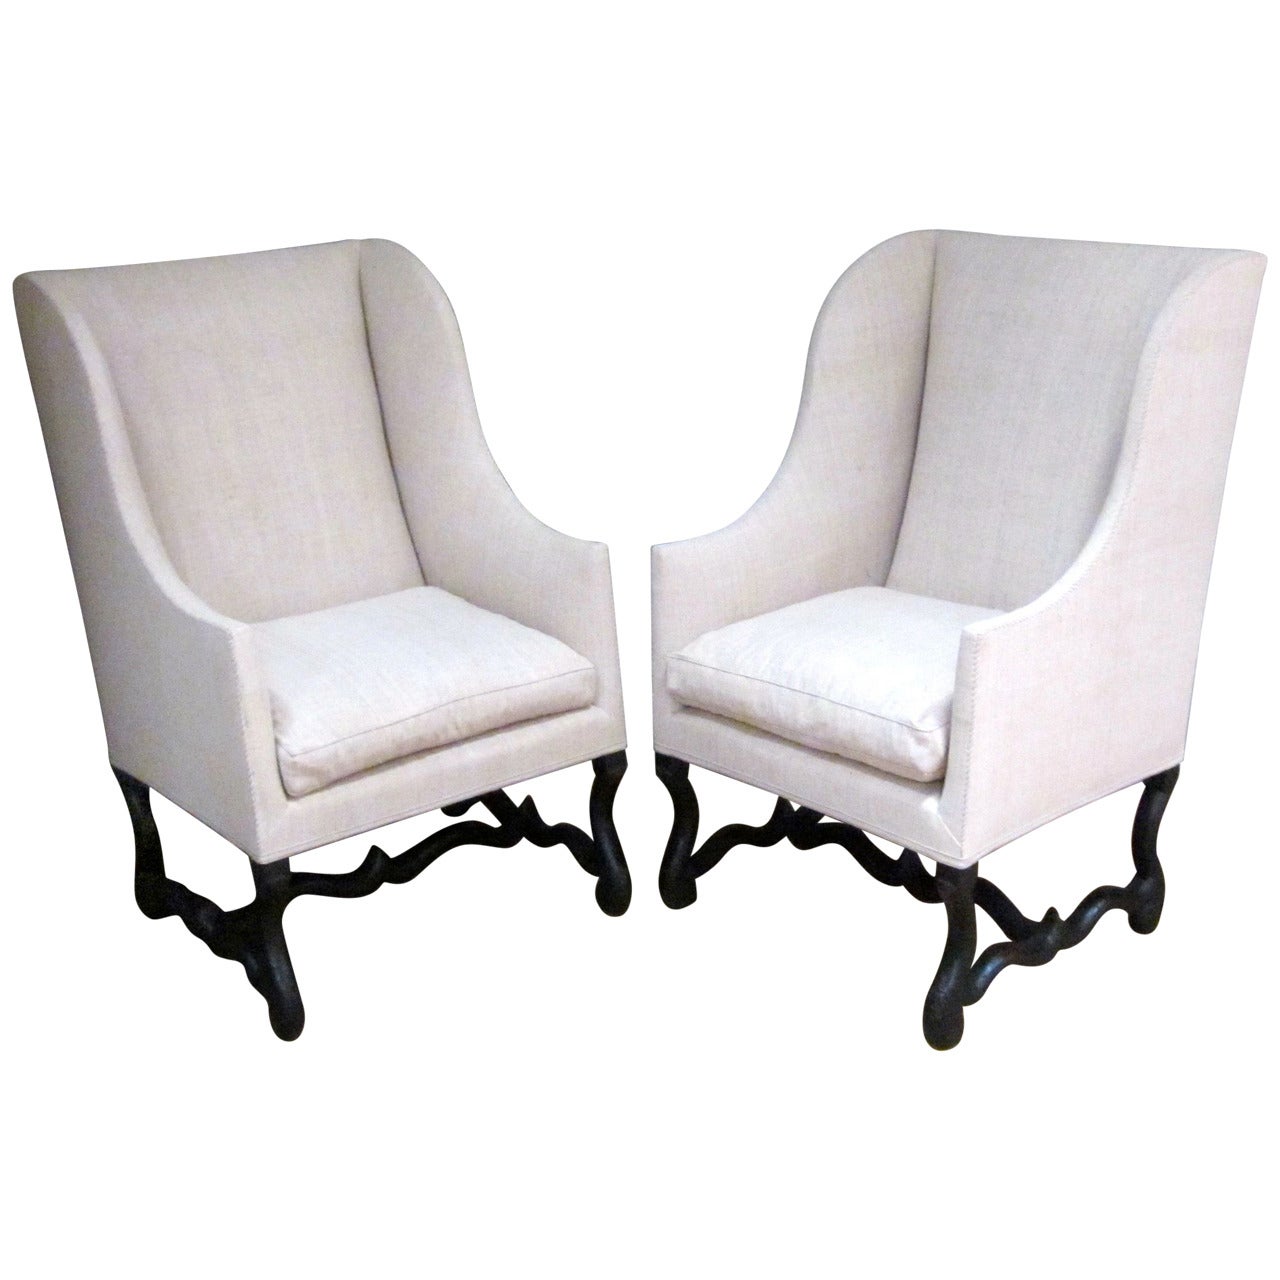 French Pair of Os D' Mouton Club Chairs, circa 1720